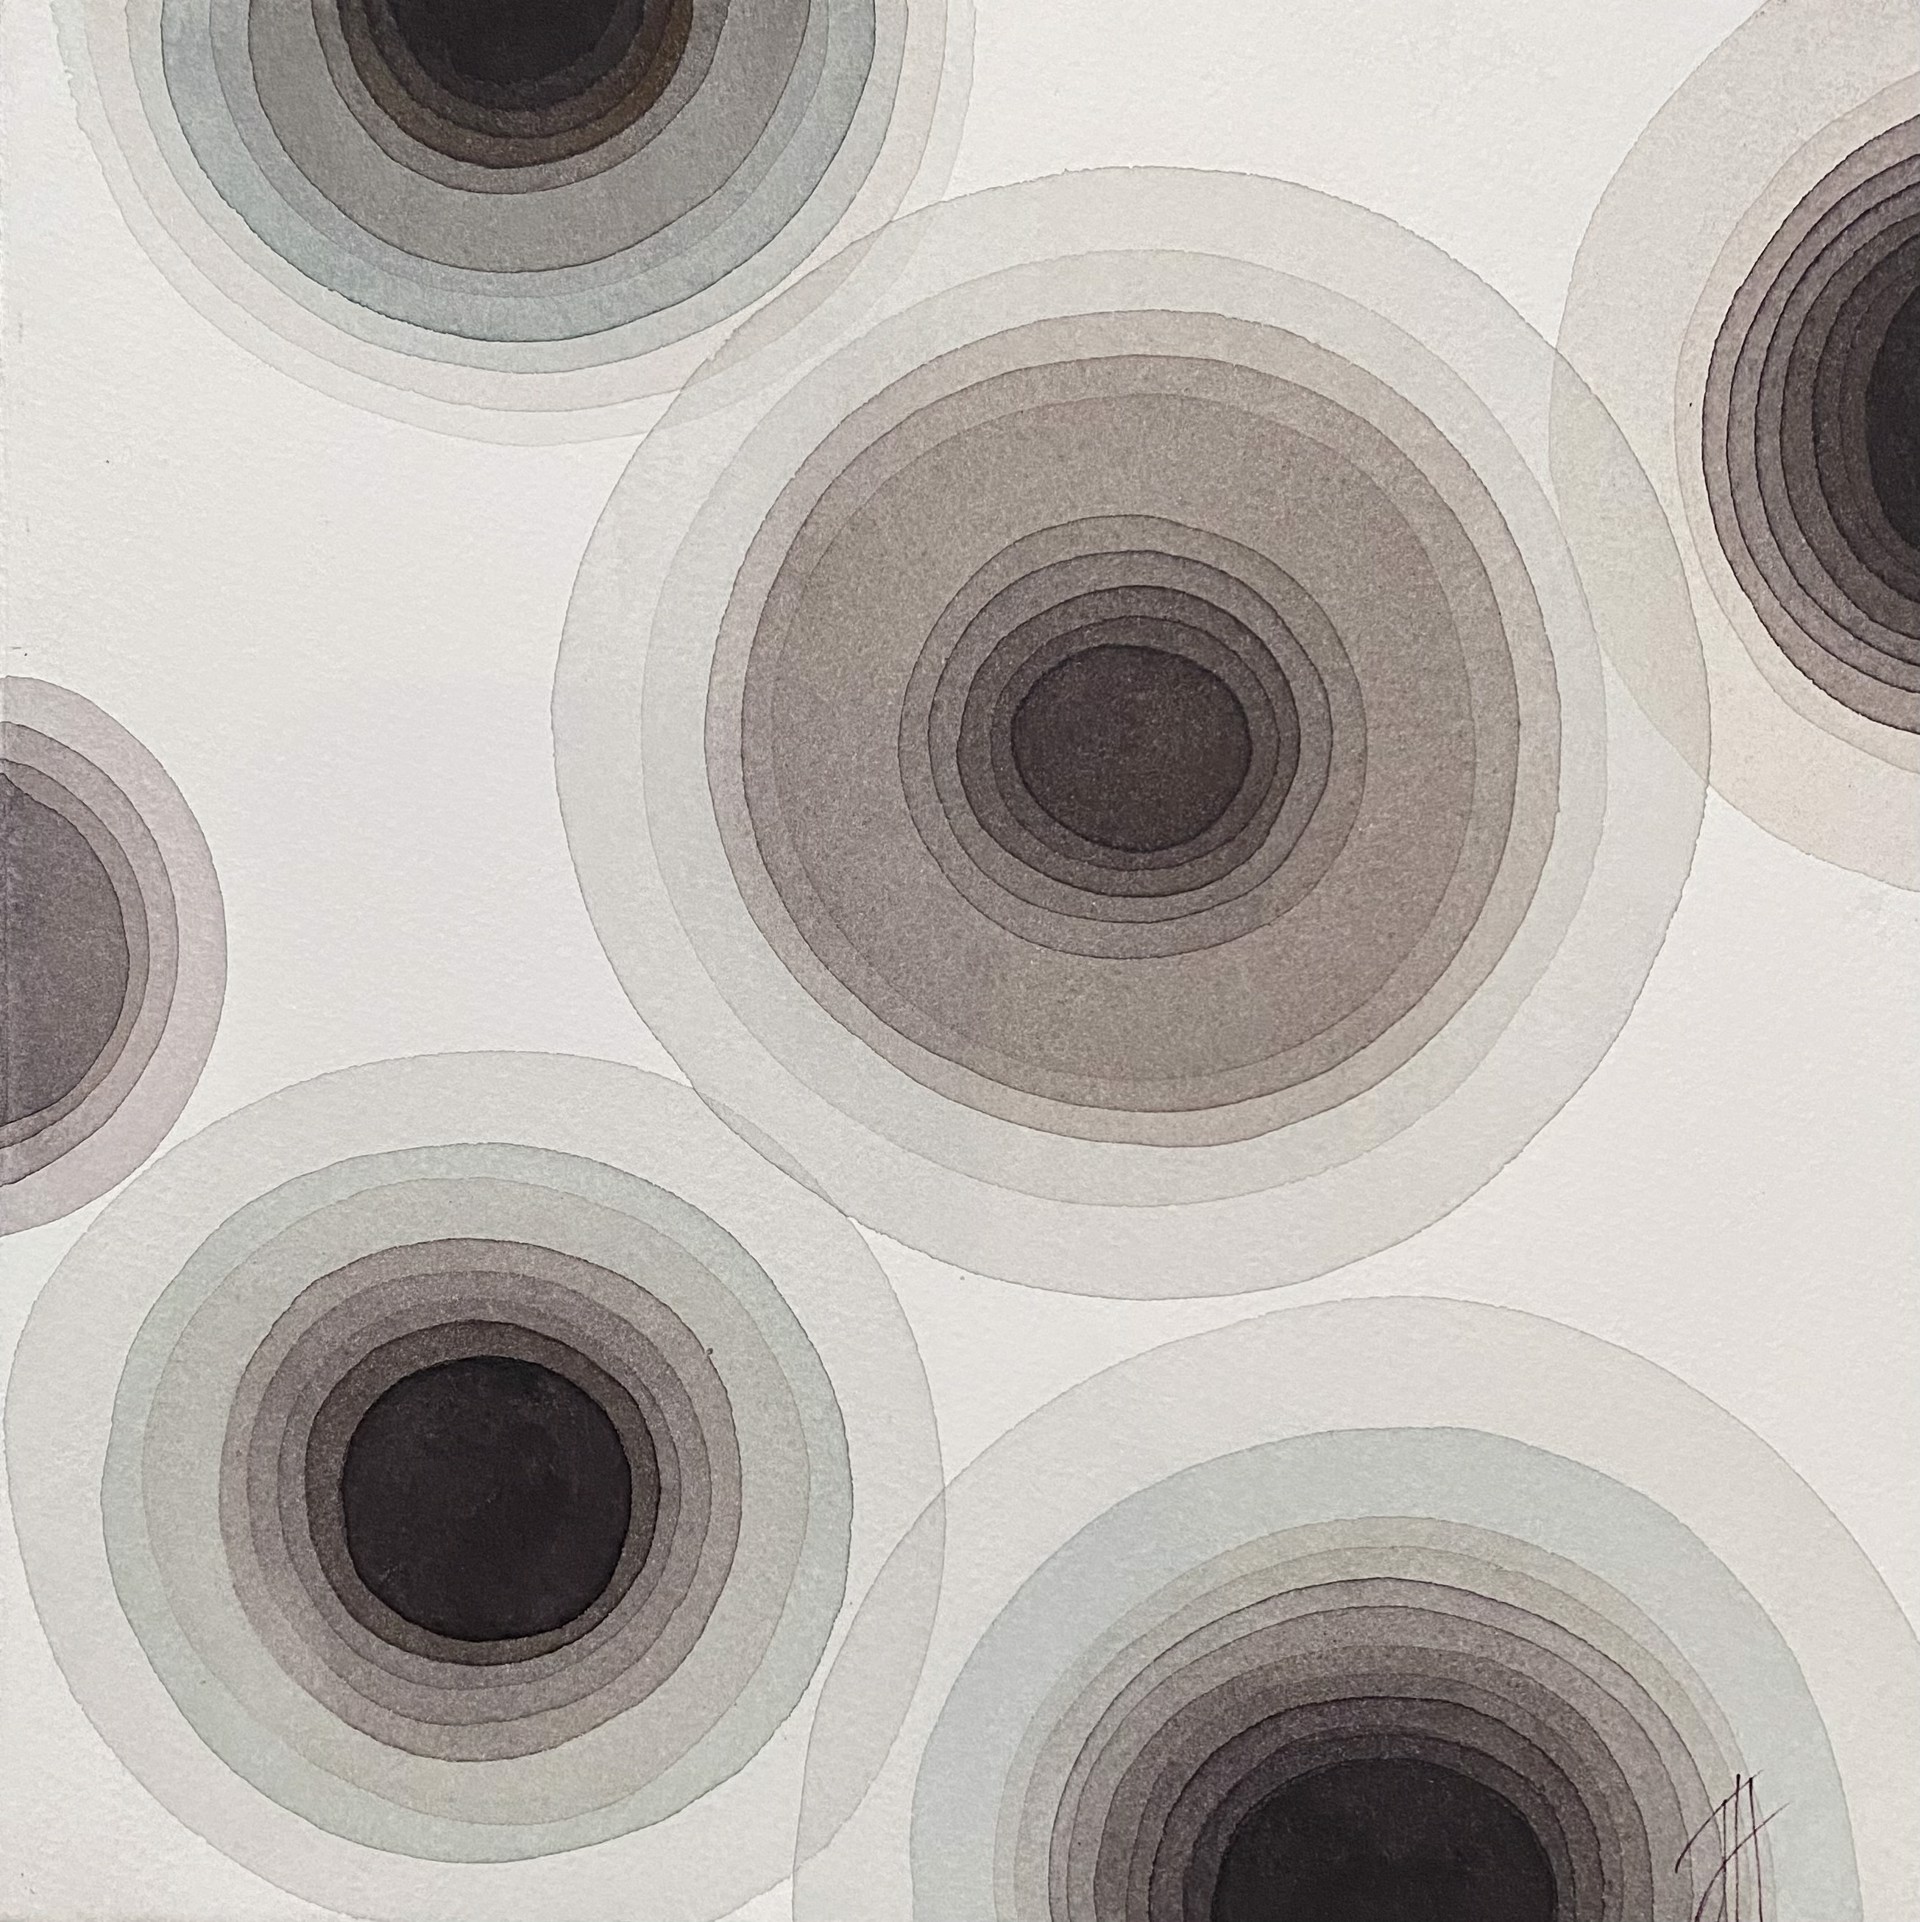 Untitled (Brown Dots) by Jan Heaton